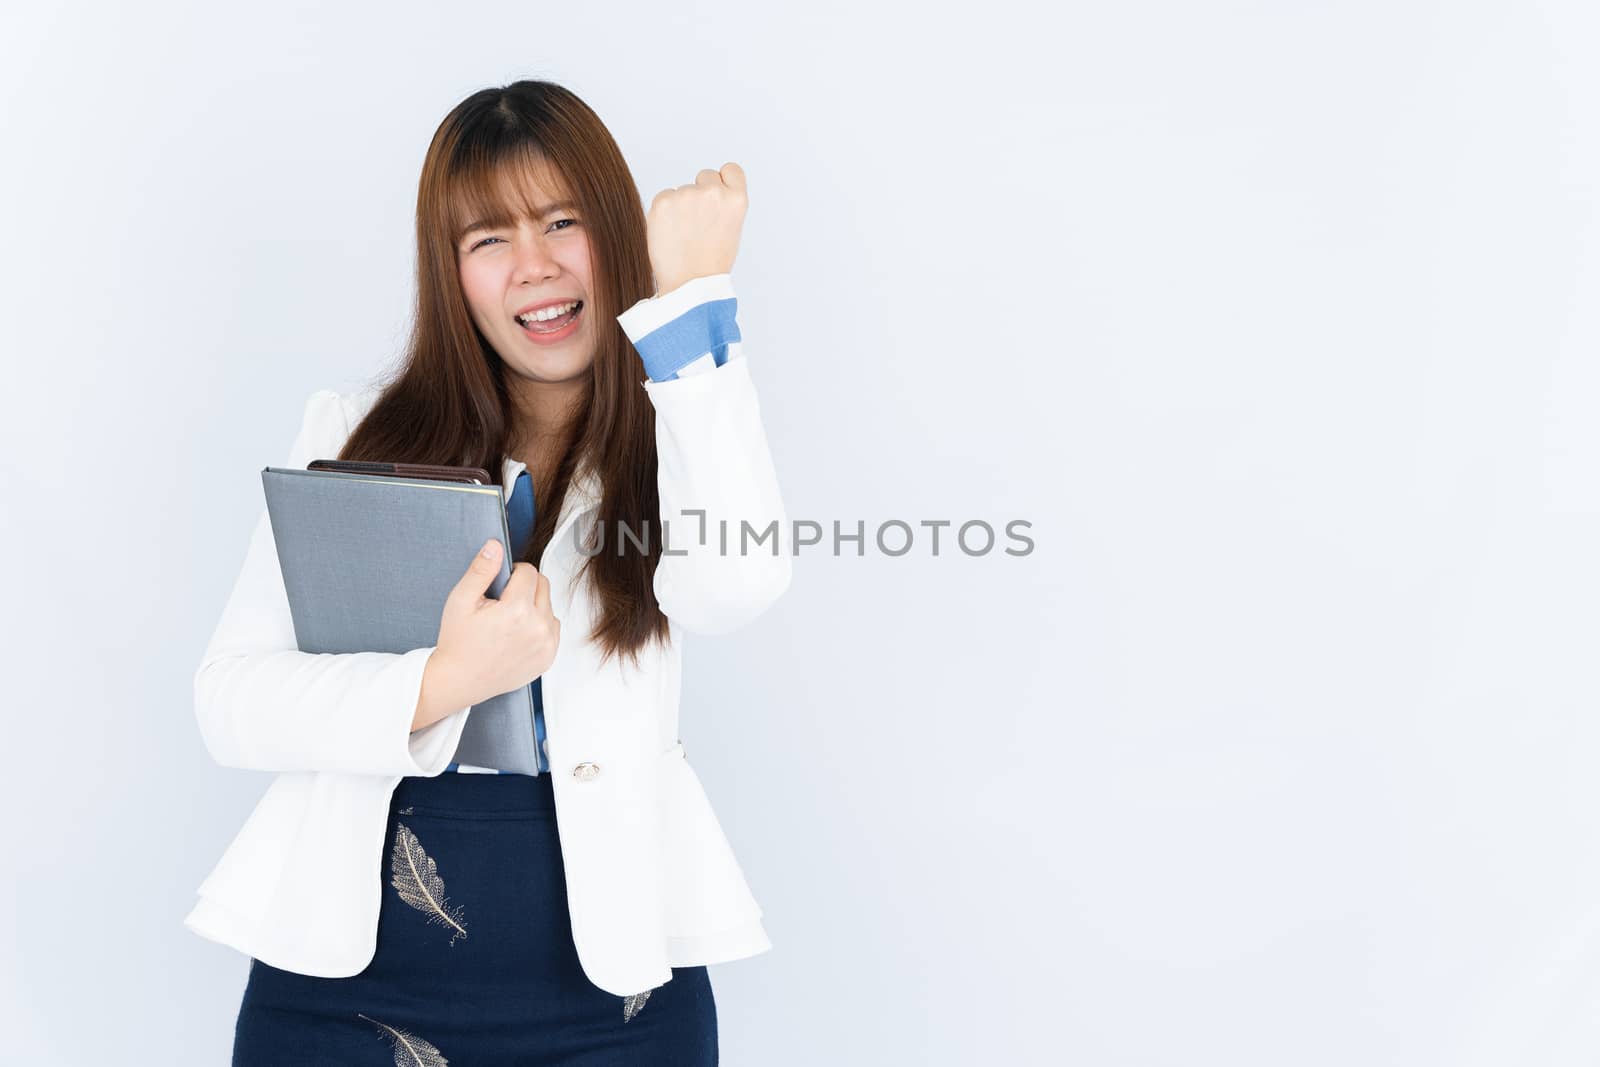 Smiling Asian business woman wearing a medical face mask holding the notebook and showing fist fighting over grey background. Back to the normal concept.